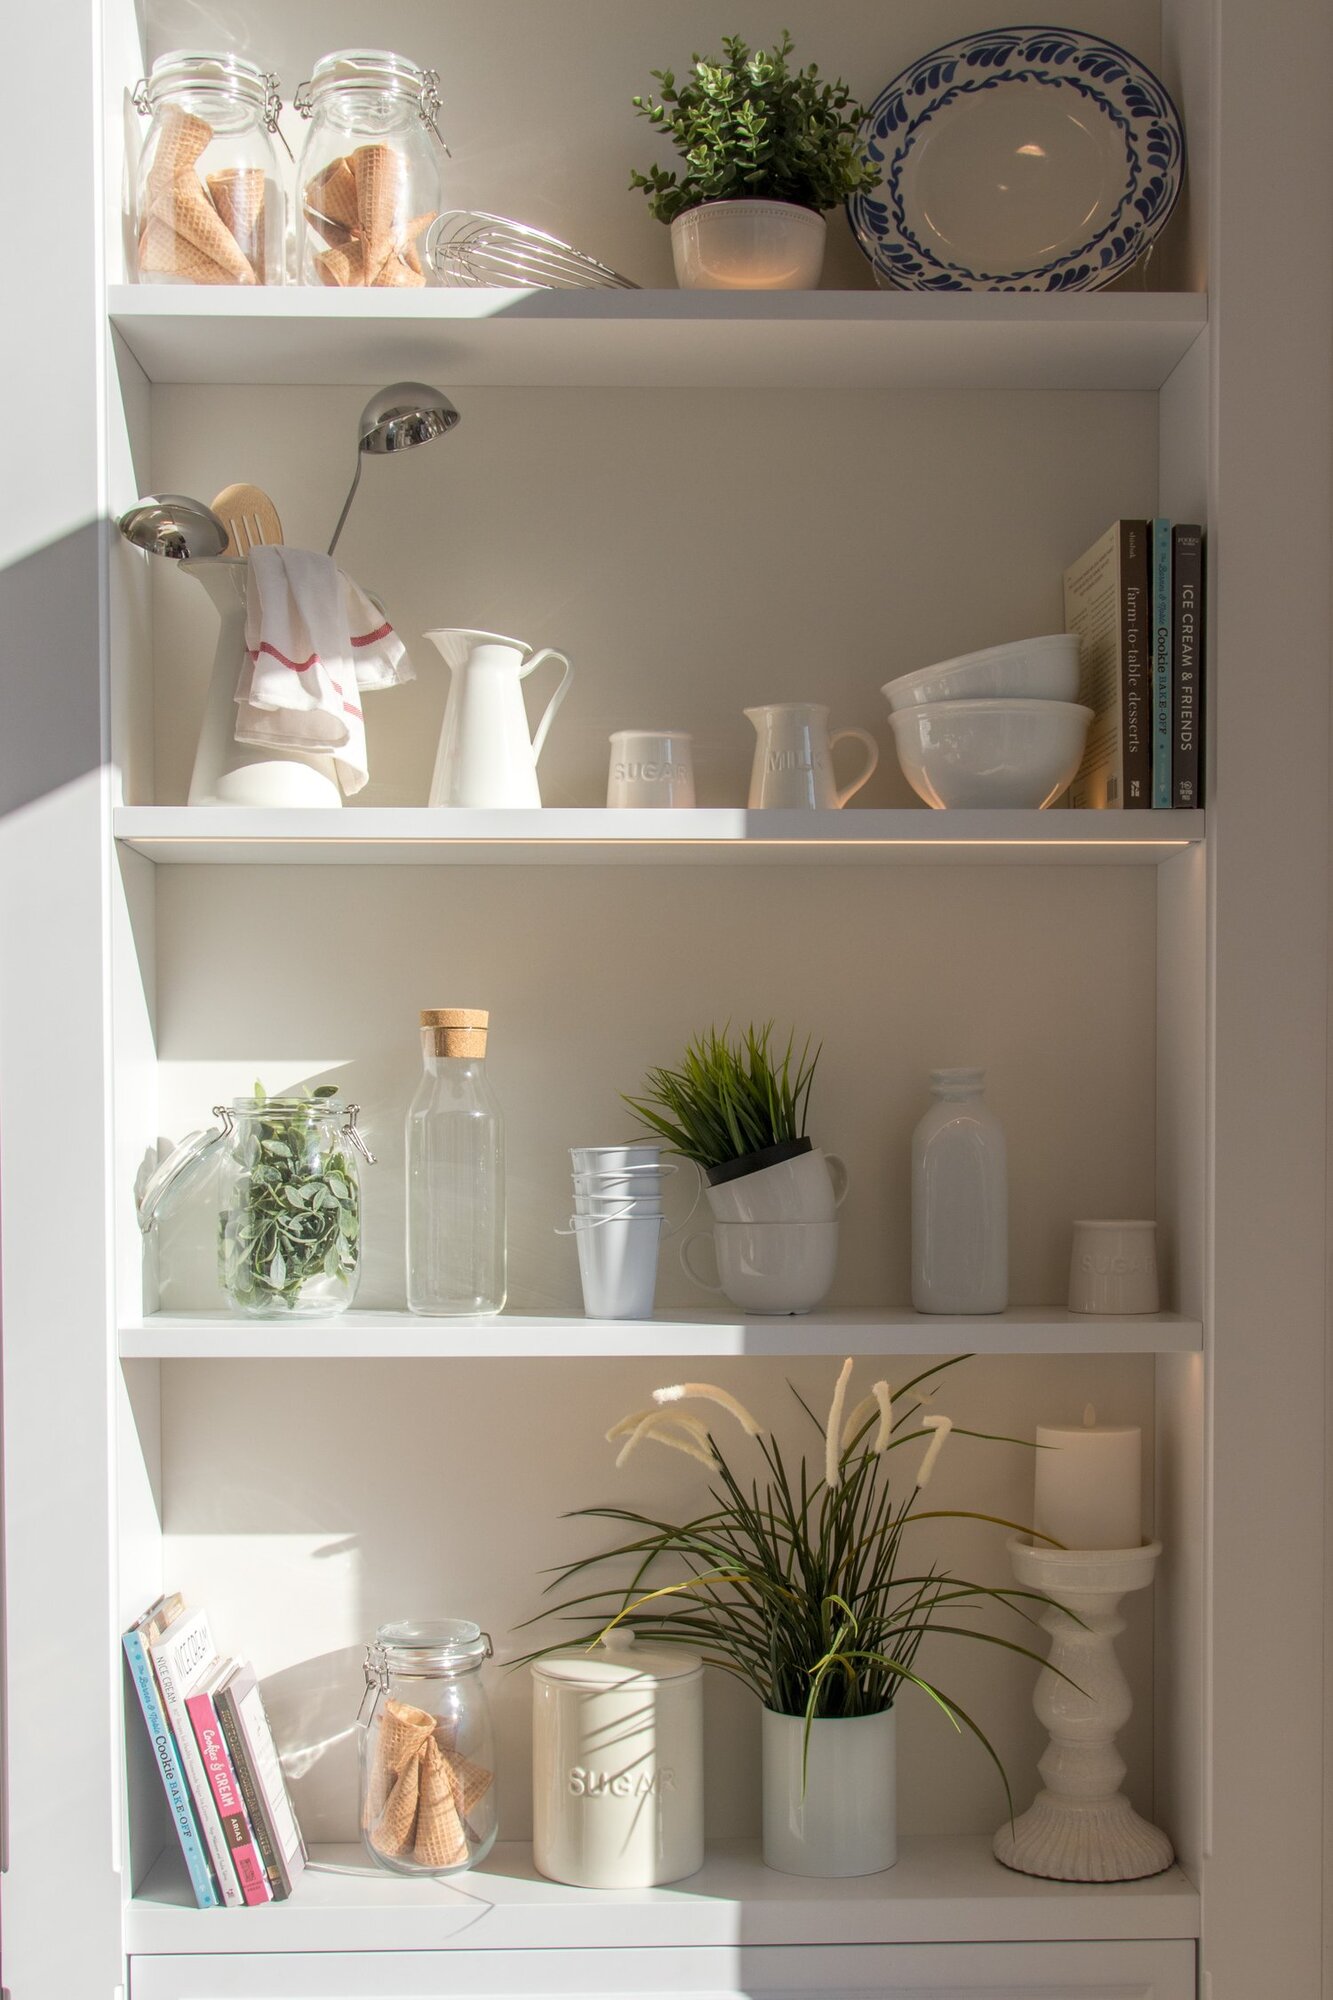 Light bright shelf with jars, bowls, and plates